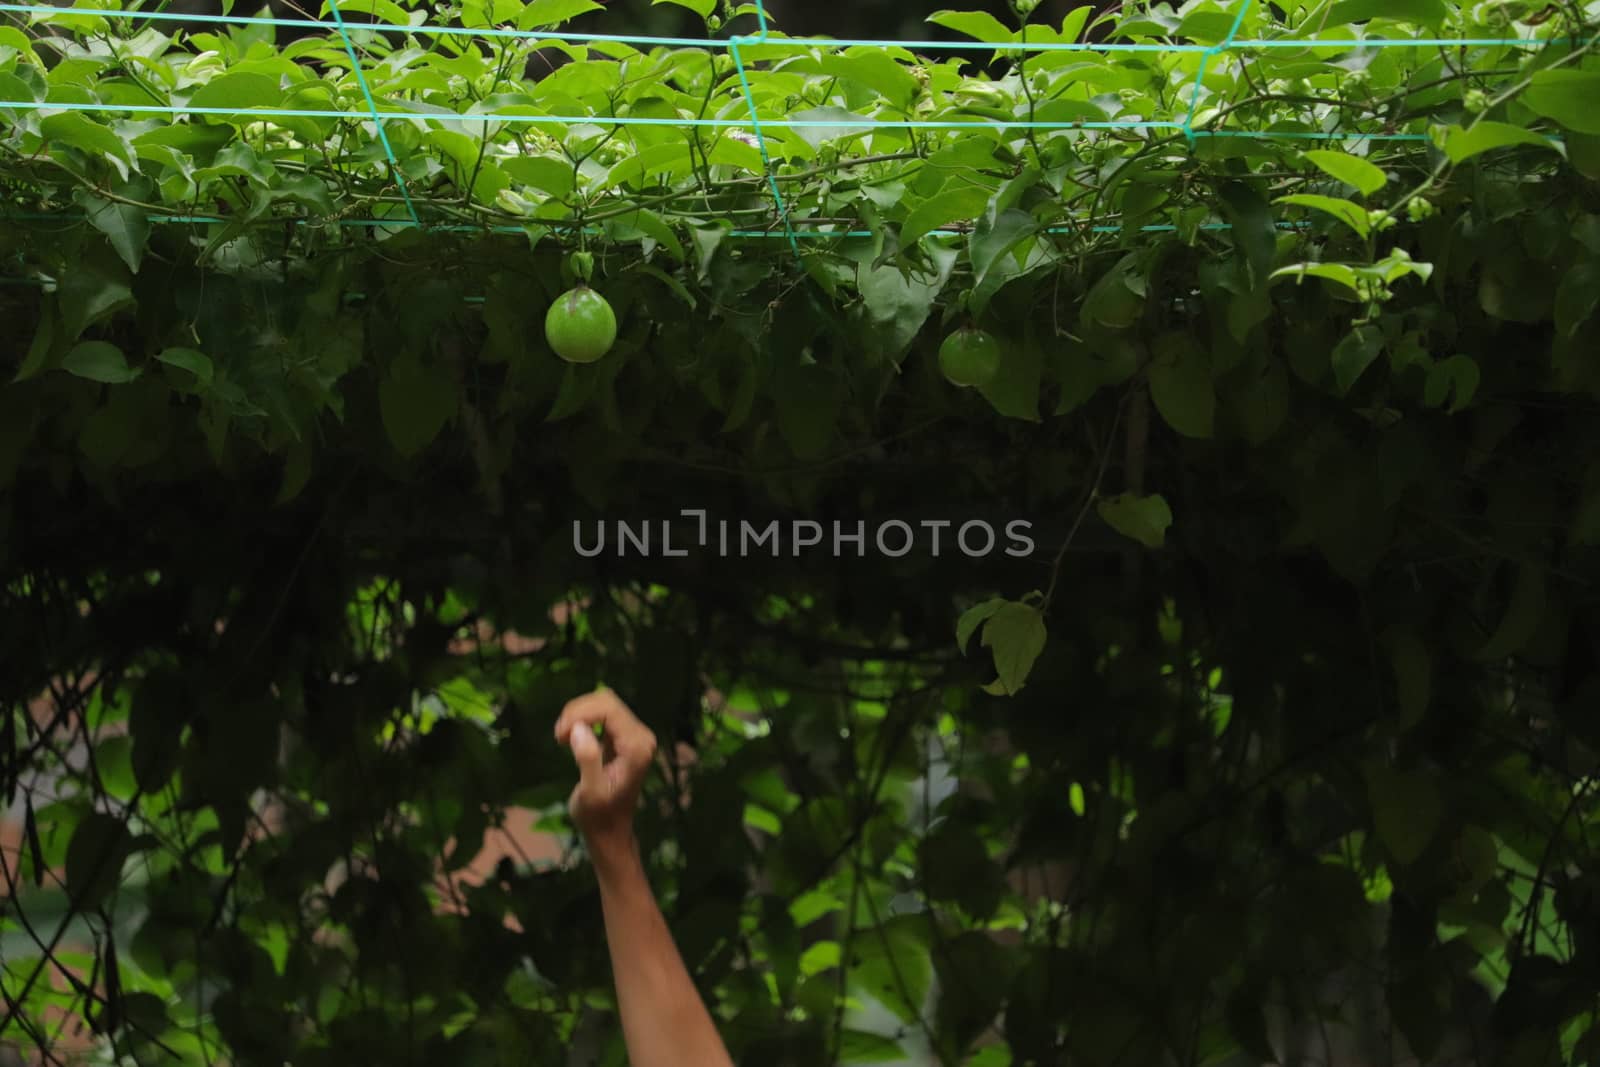 Green fruit hanging from the stem by amr_lal